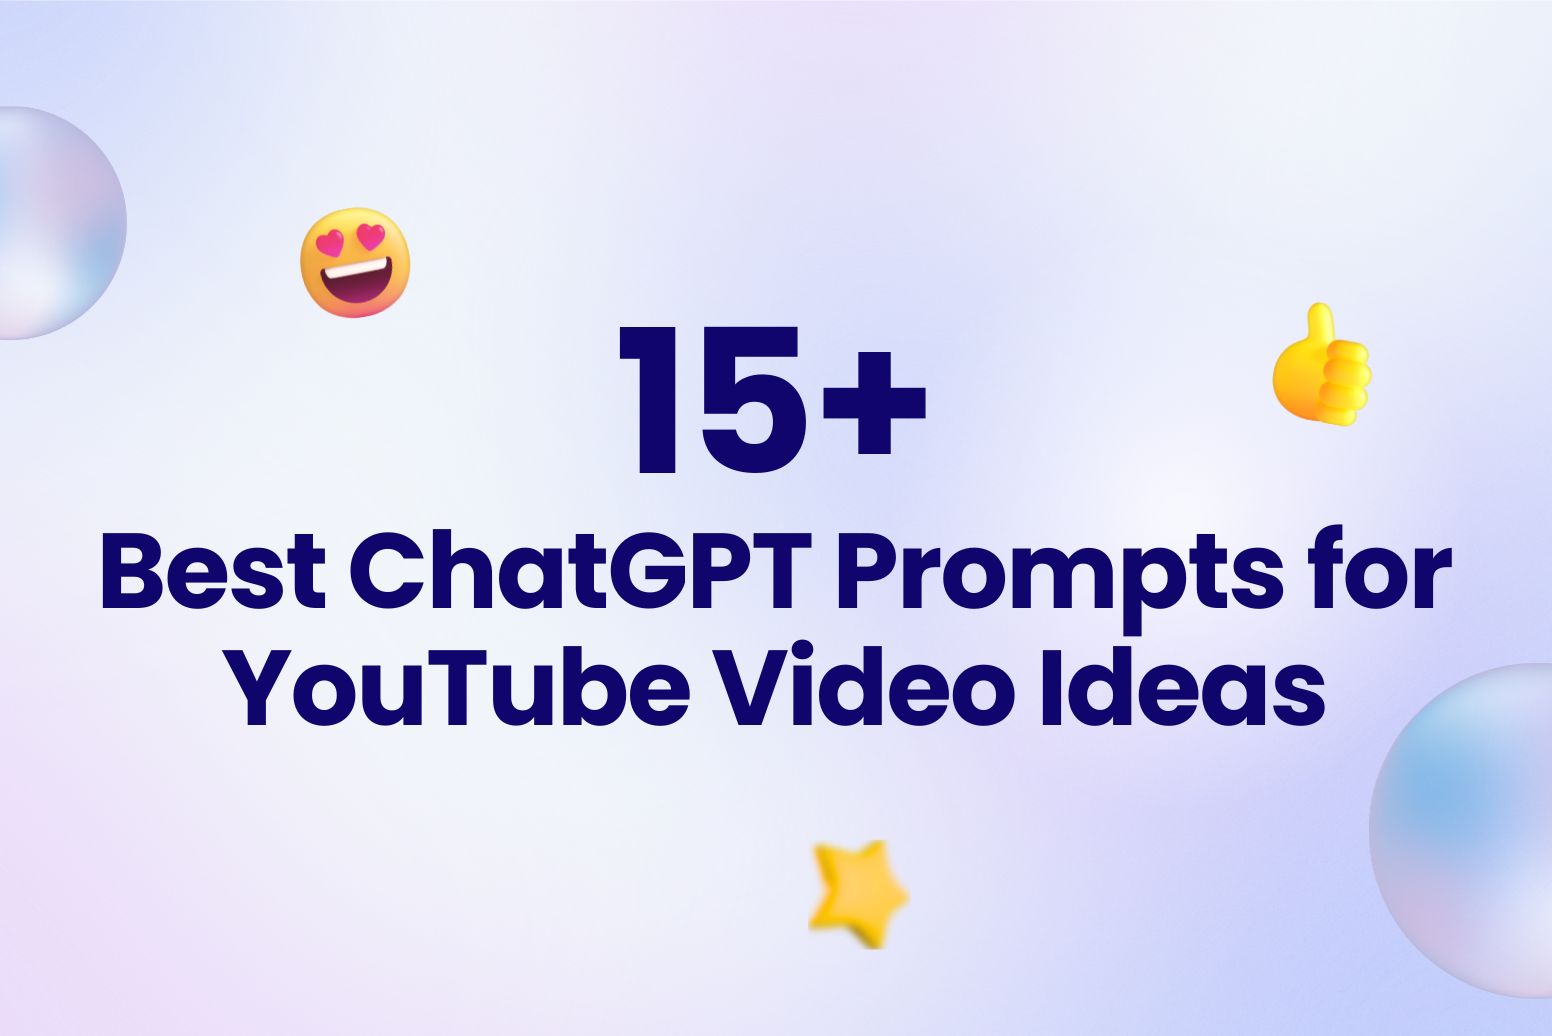 15+ Best ChatGPT Prompts for YouTube Video Ideas